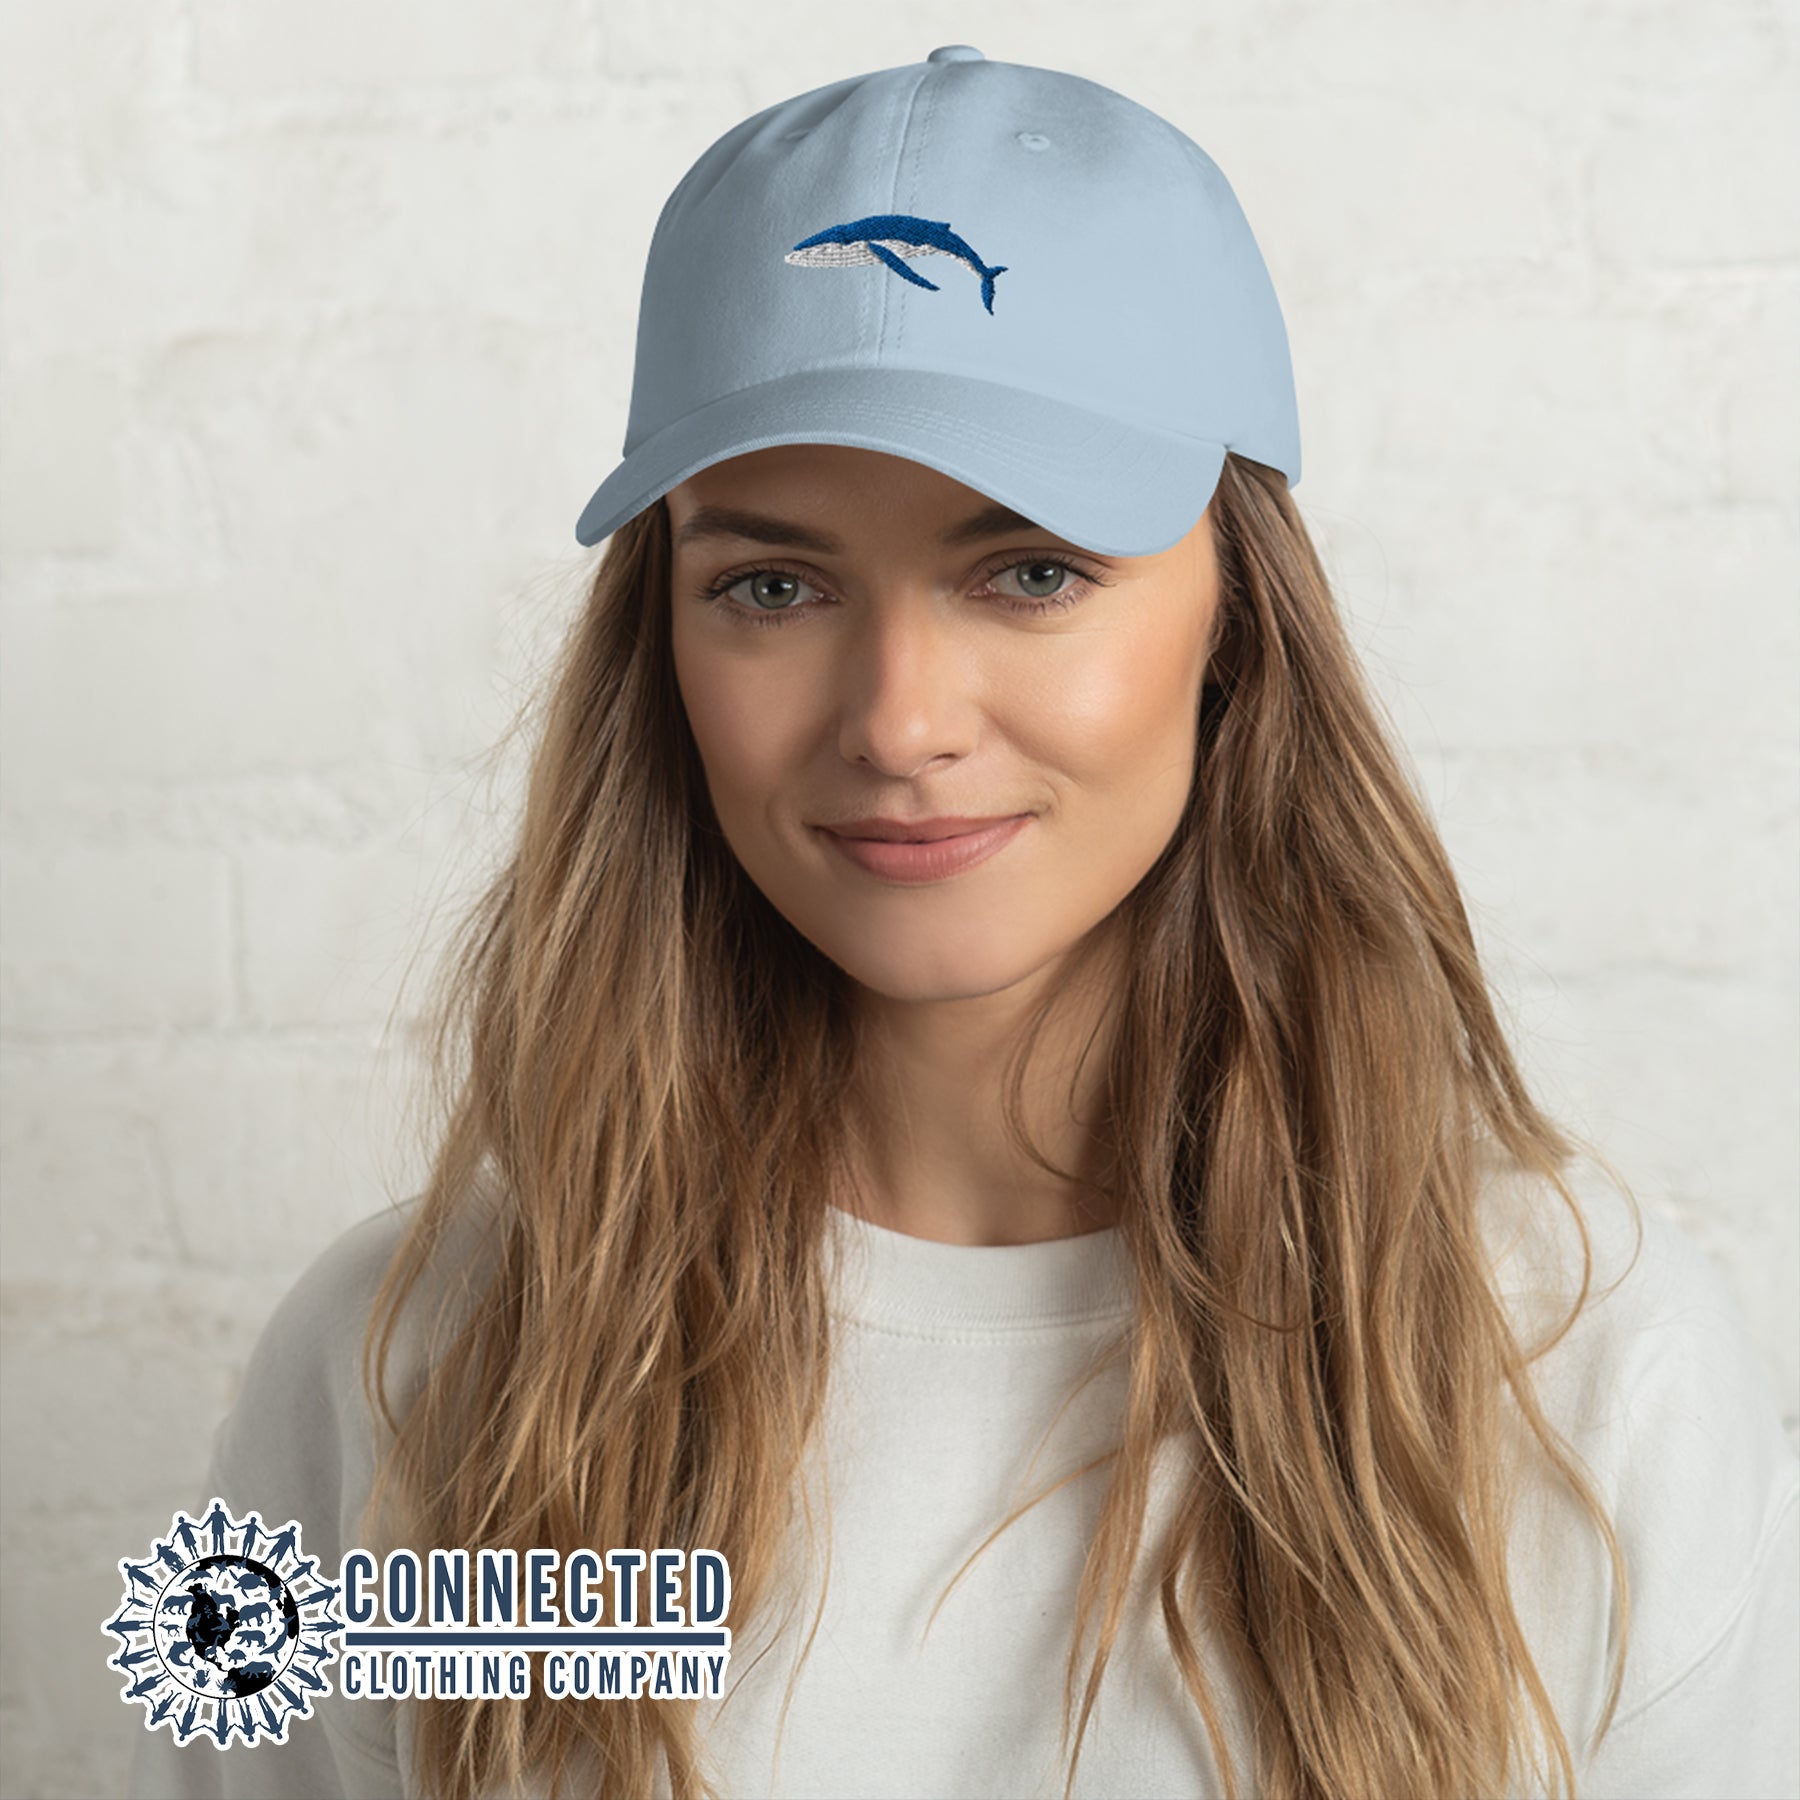 Model Wearing Blue Humpback Whale Cotton Cap - Connected Clothing Company - 10% of profits donated to Mission Blue ocean conservation